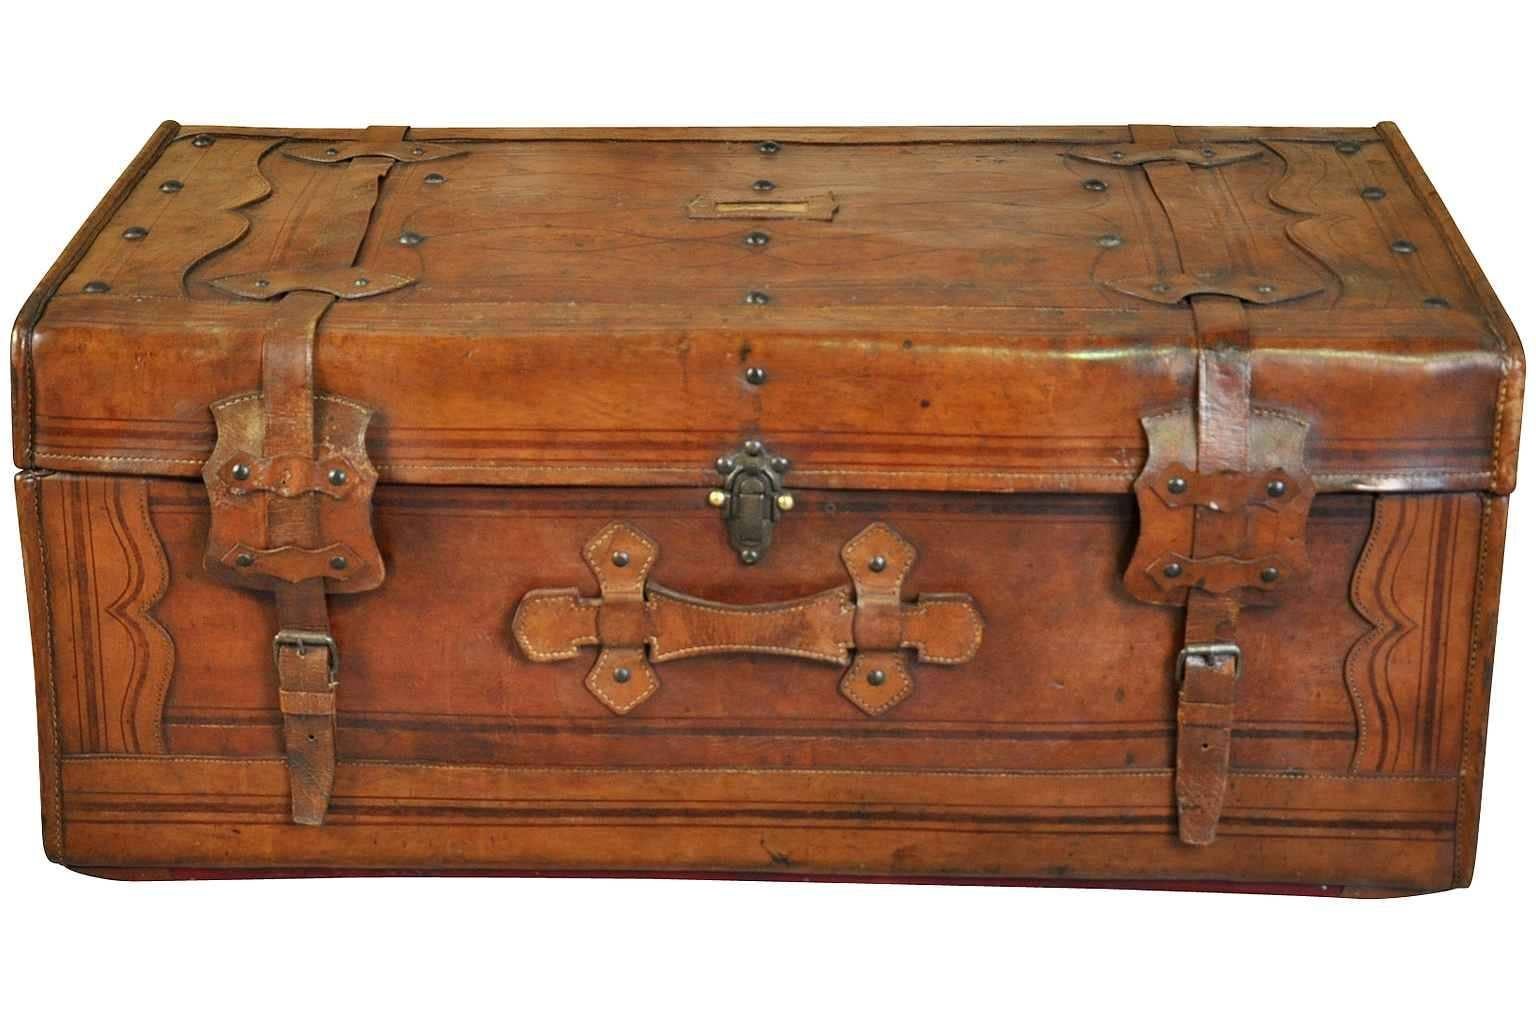 A very handsome French later 19th century-early 20th century trunk. Beautifully crafted in fine leather. This piece will serve as an excellent coffee table.